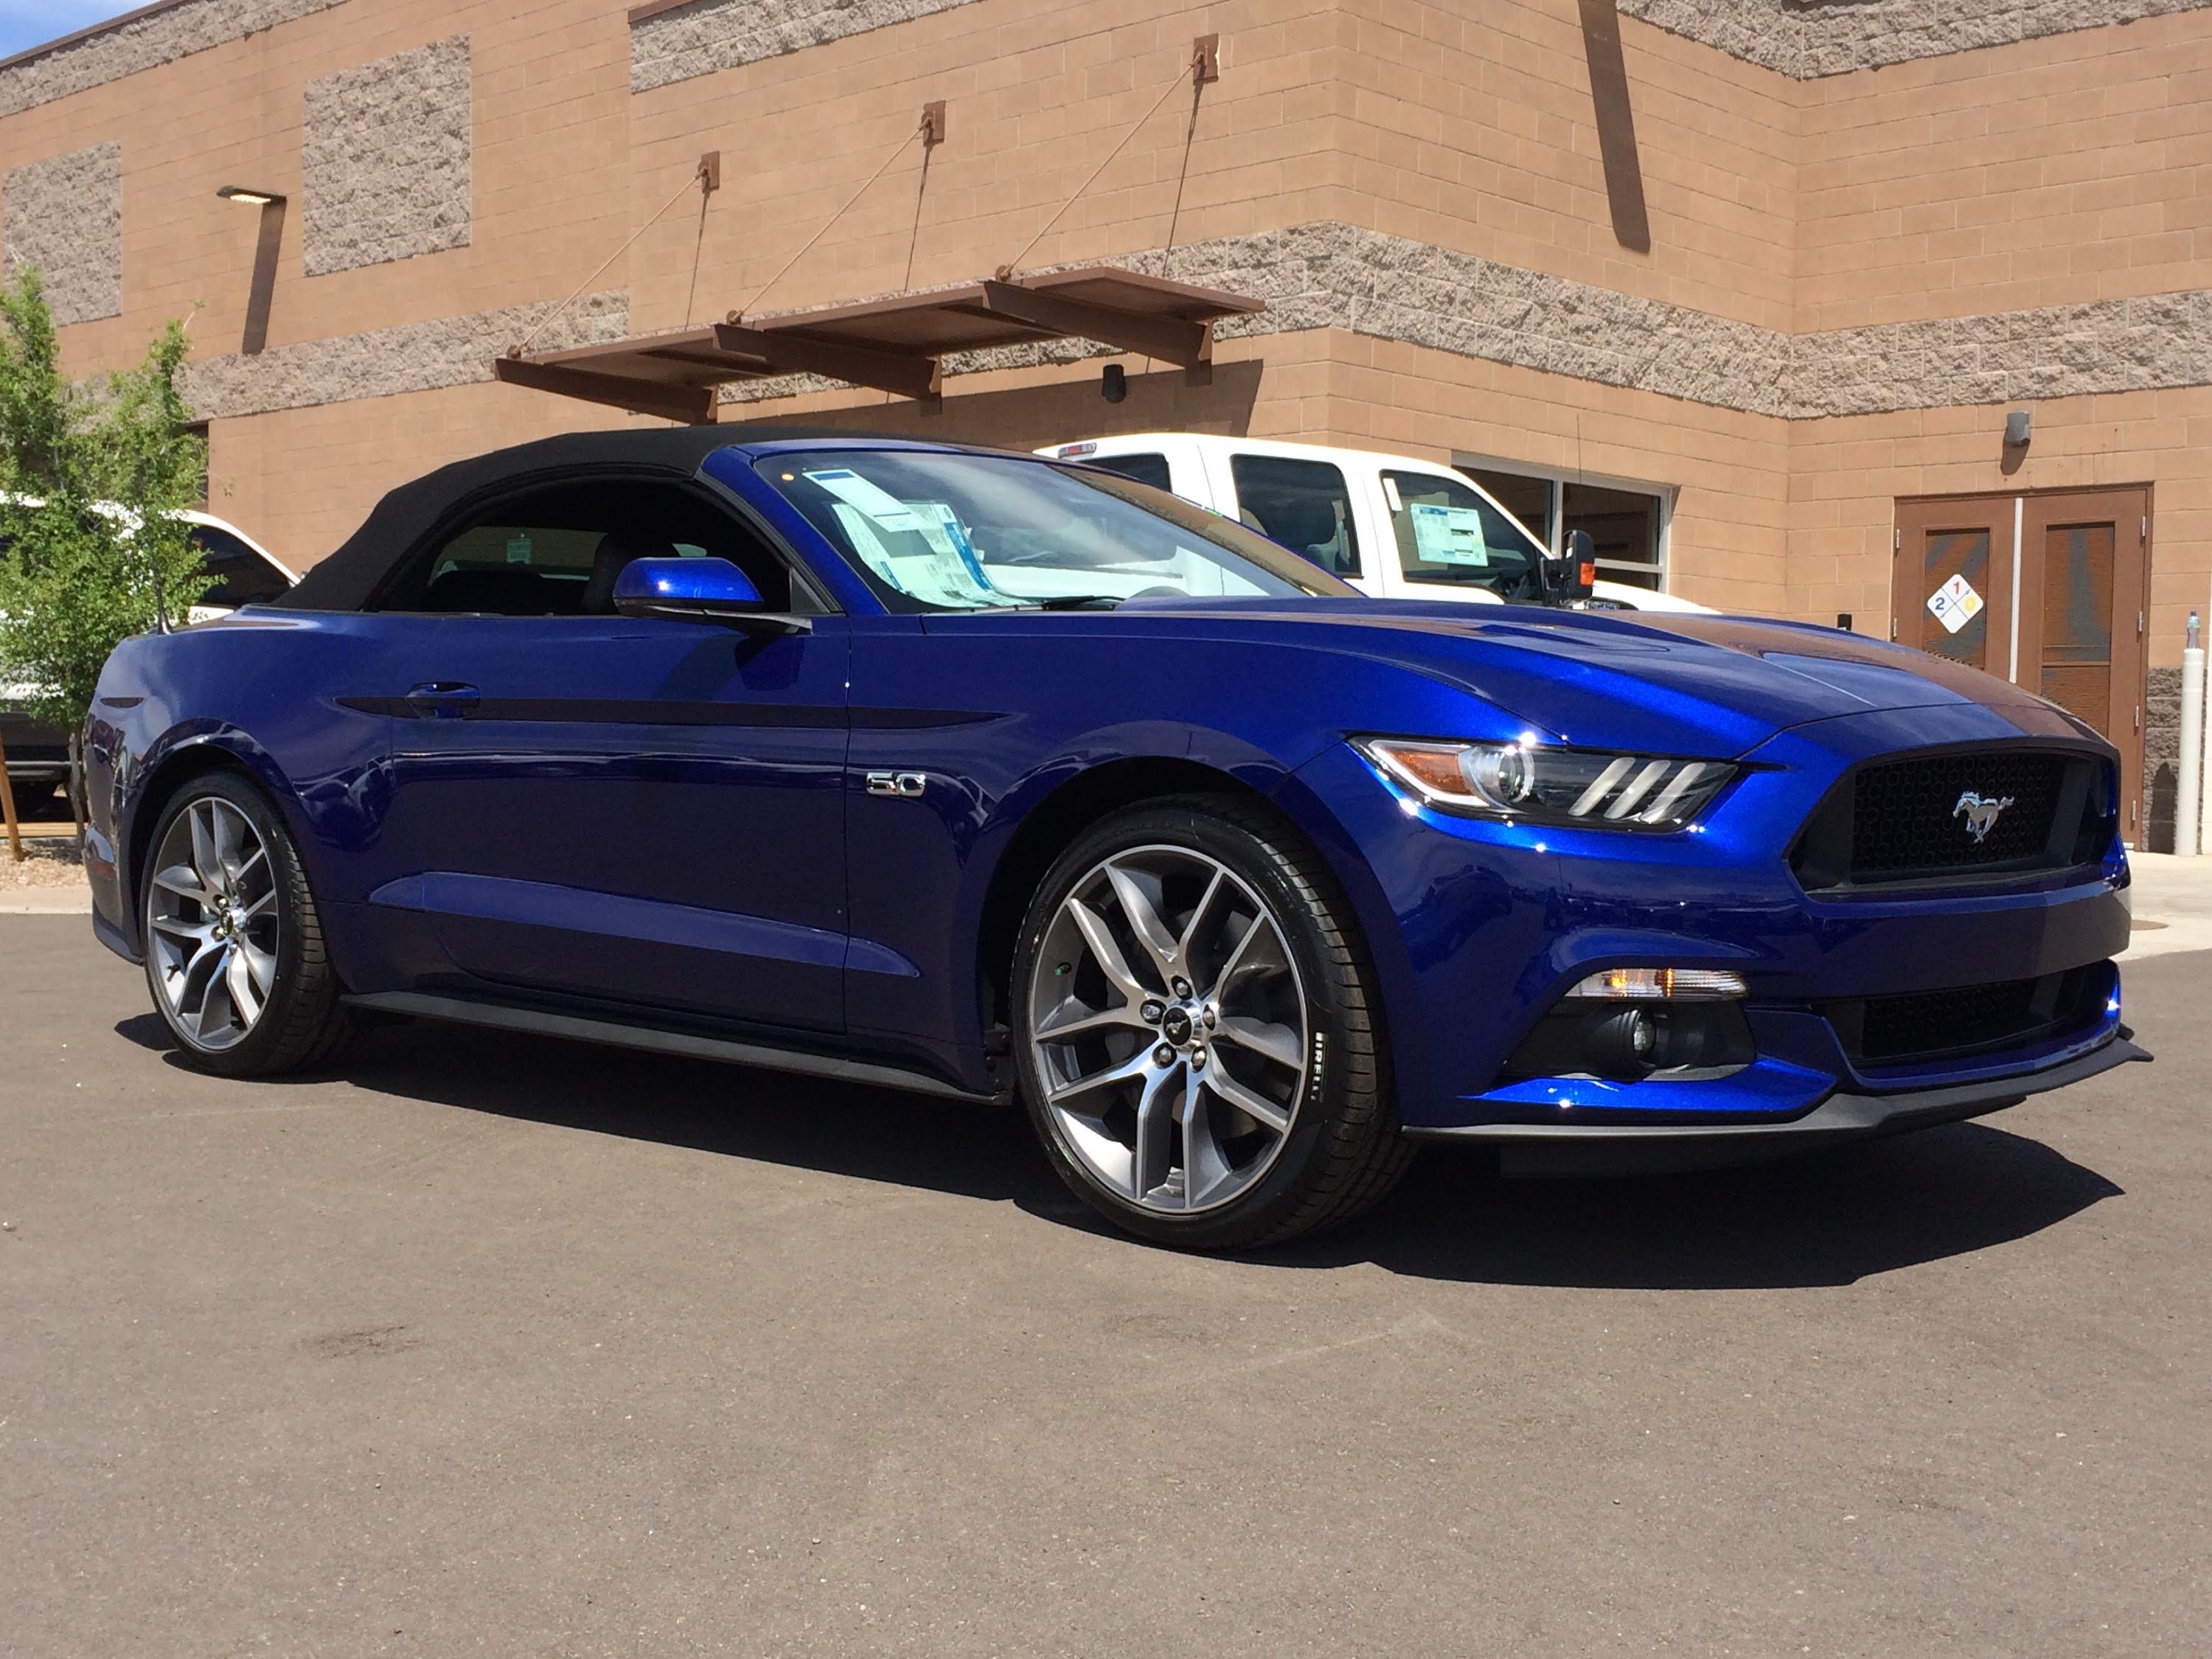 Ford Mustang Convertible exterior model